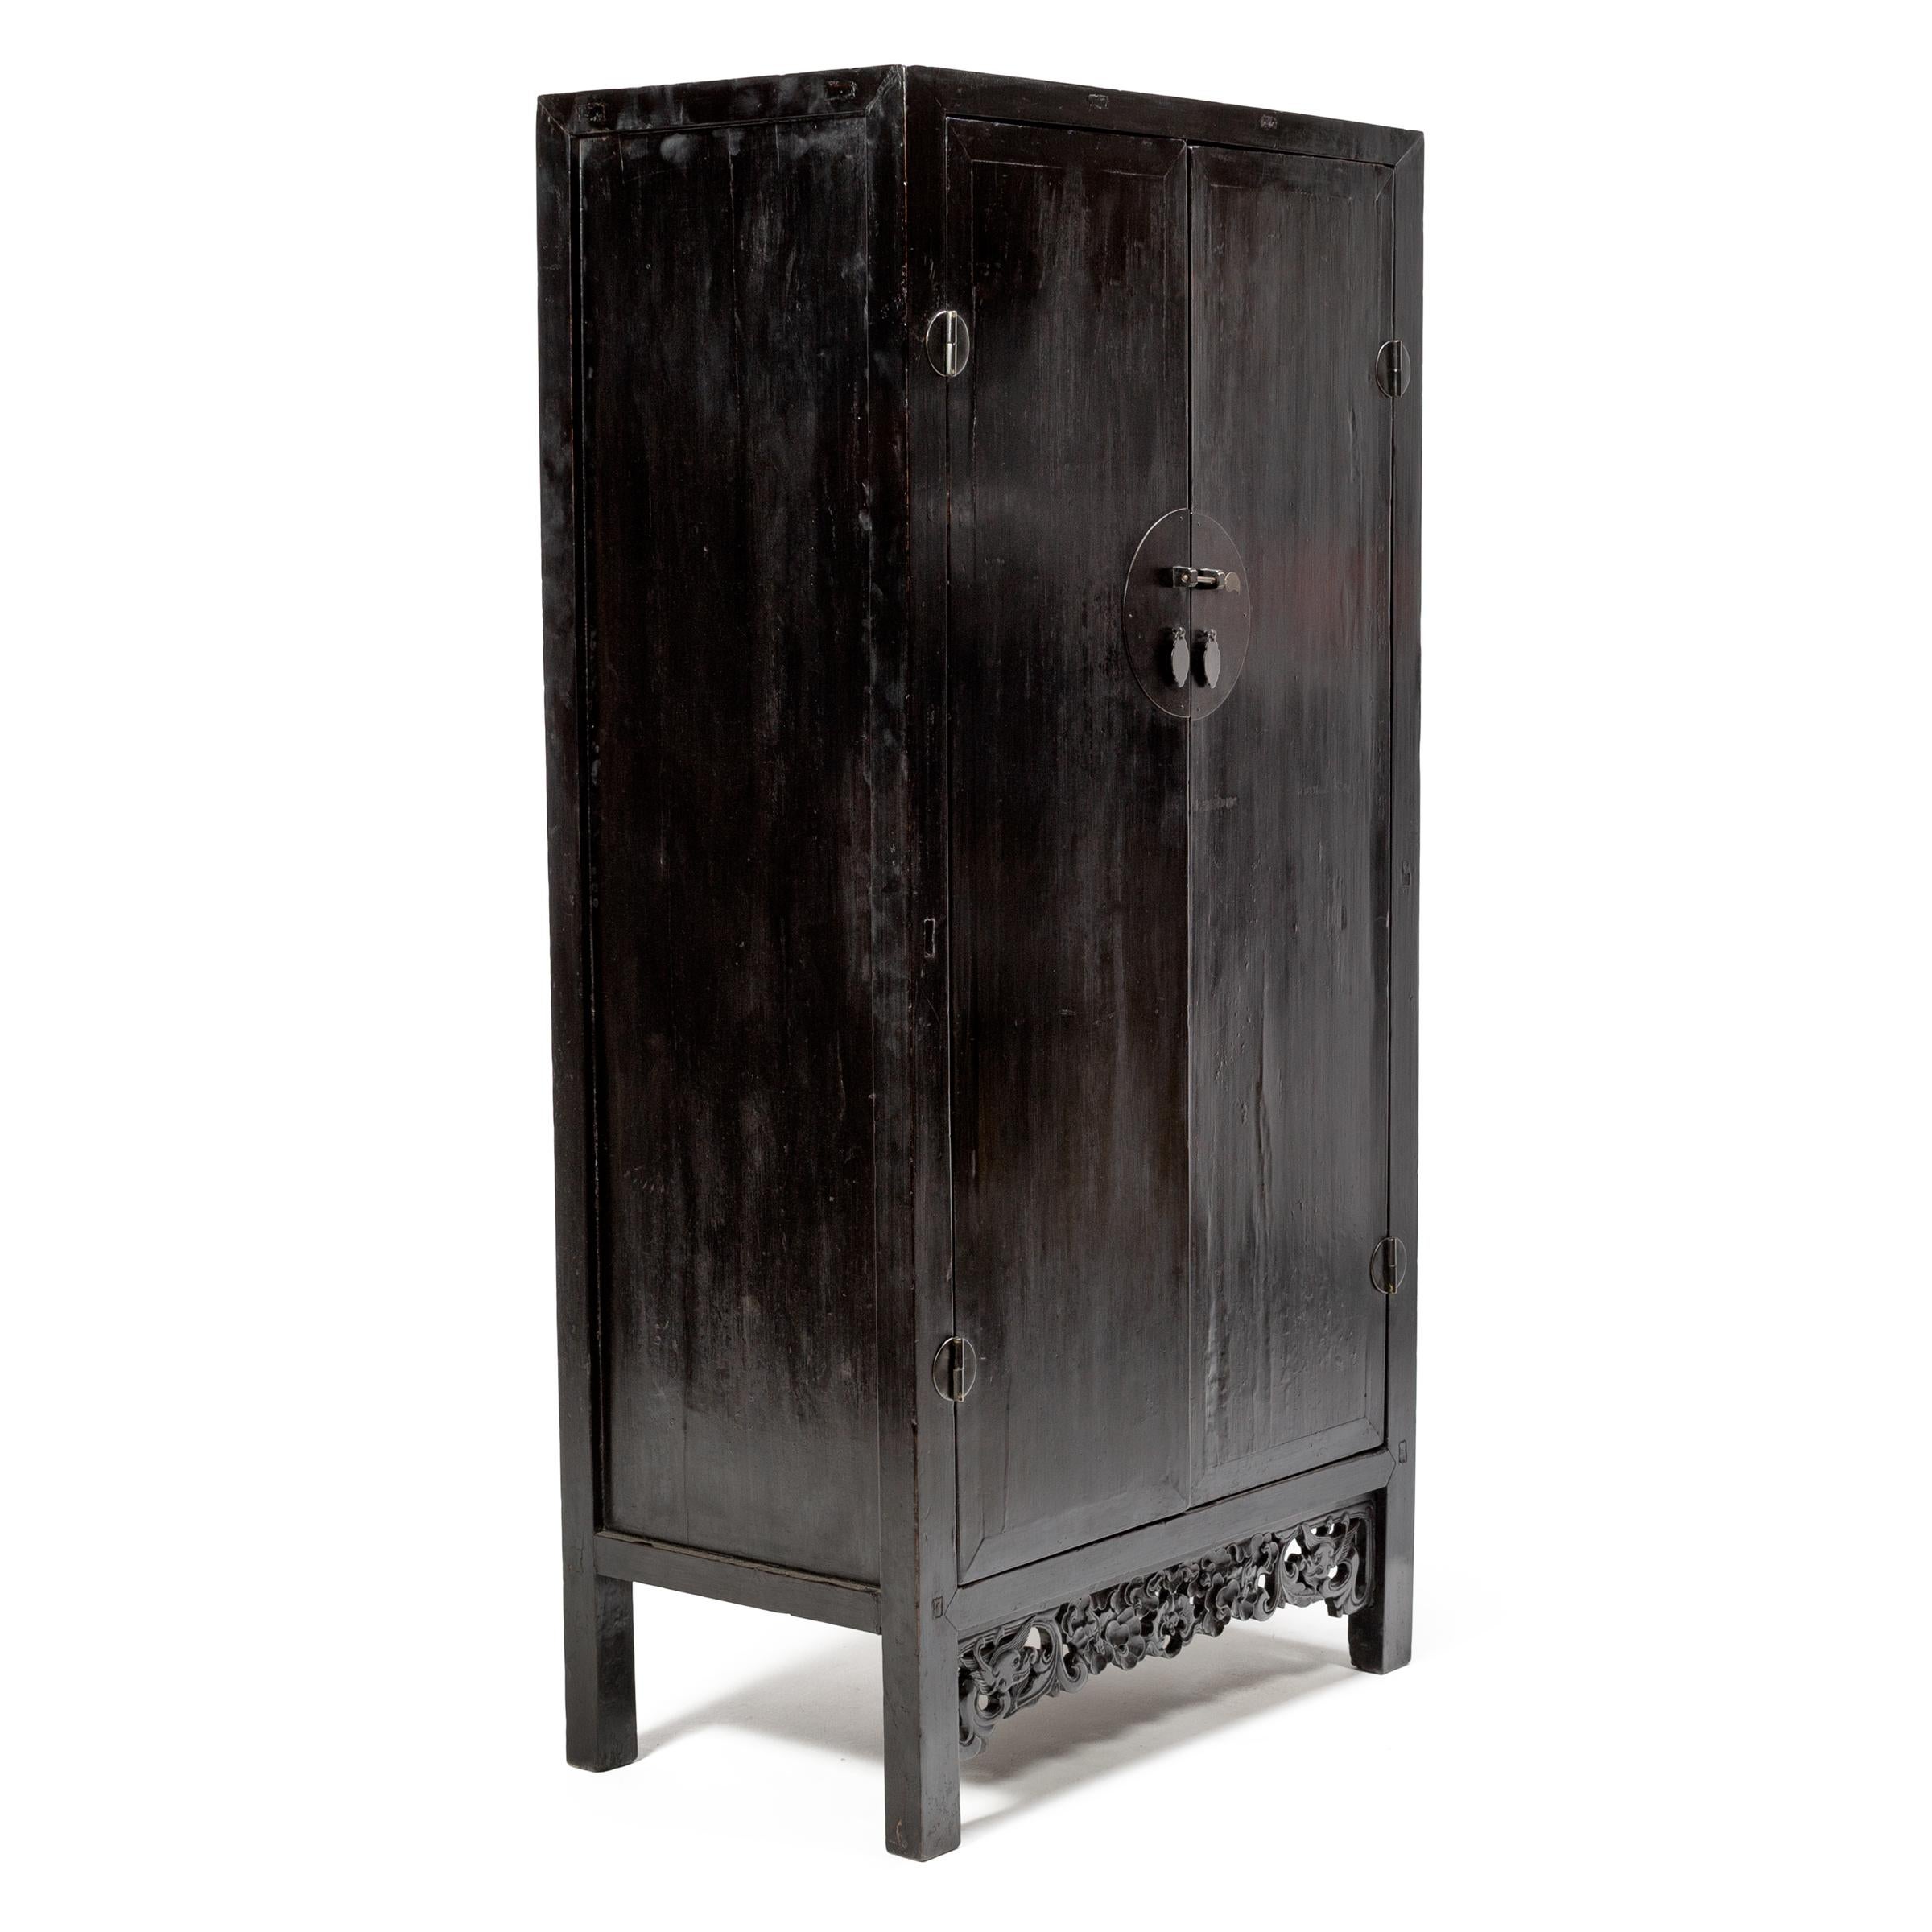 Qing Chinese Black Lacquer Prosperity Cabinet, c. 1850